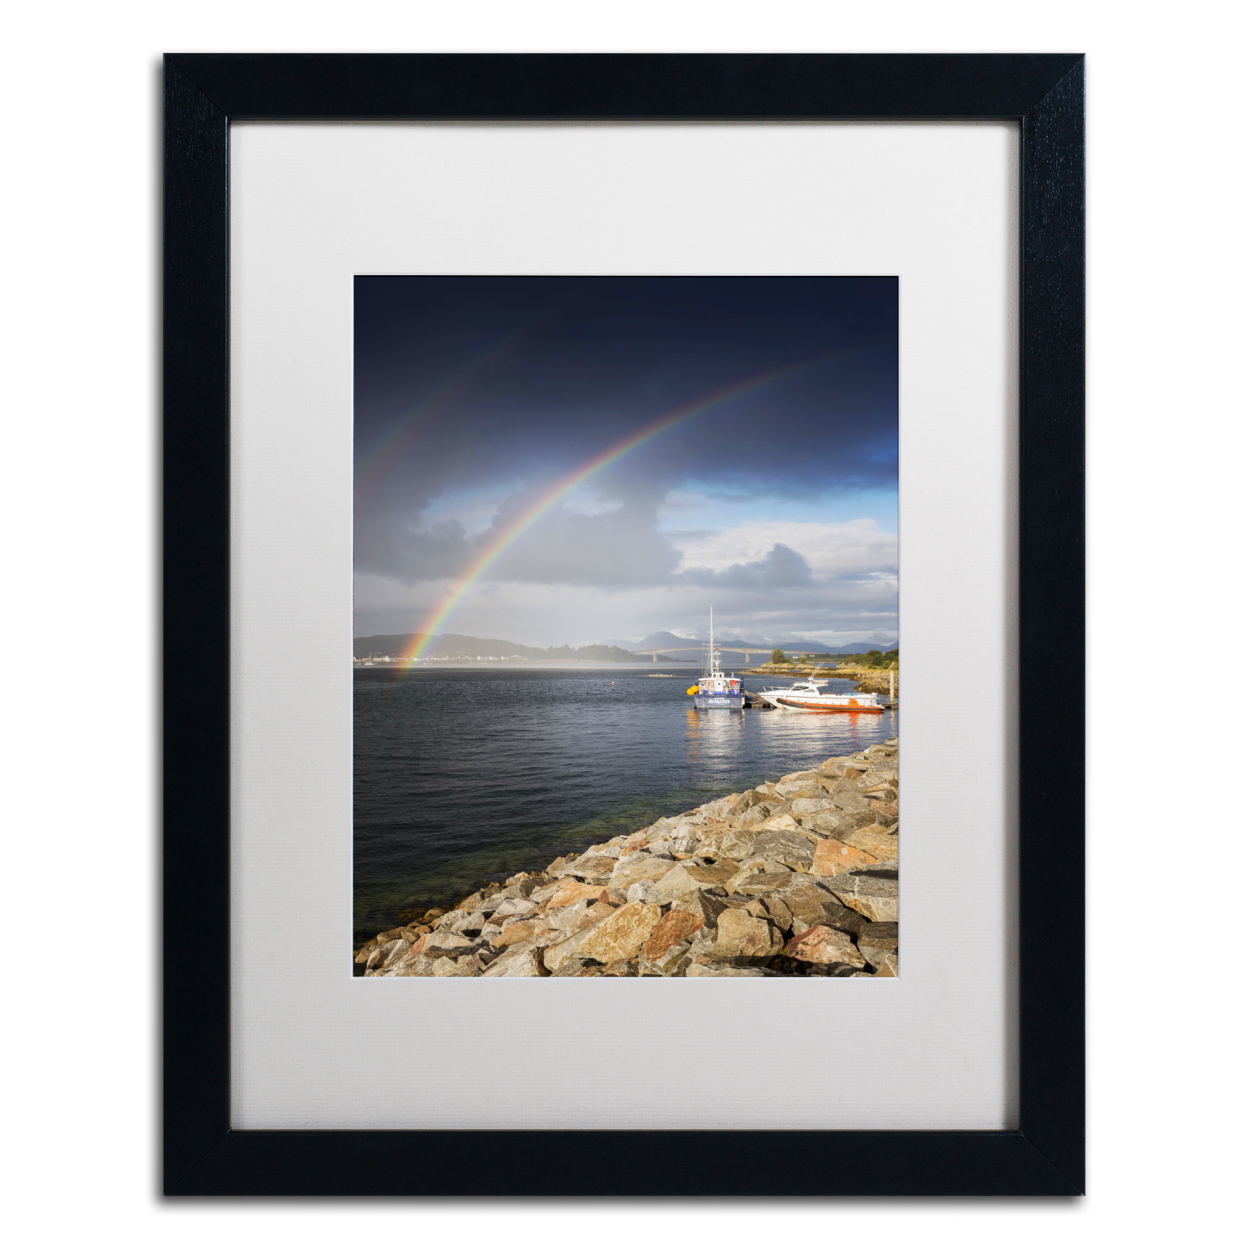 Philippe Sainte-Laudy 'Over The Rainbow' Black Wooden Framed Art 18 X 22 Inches